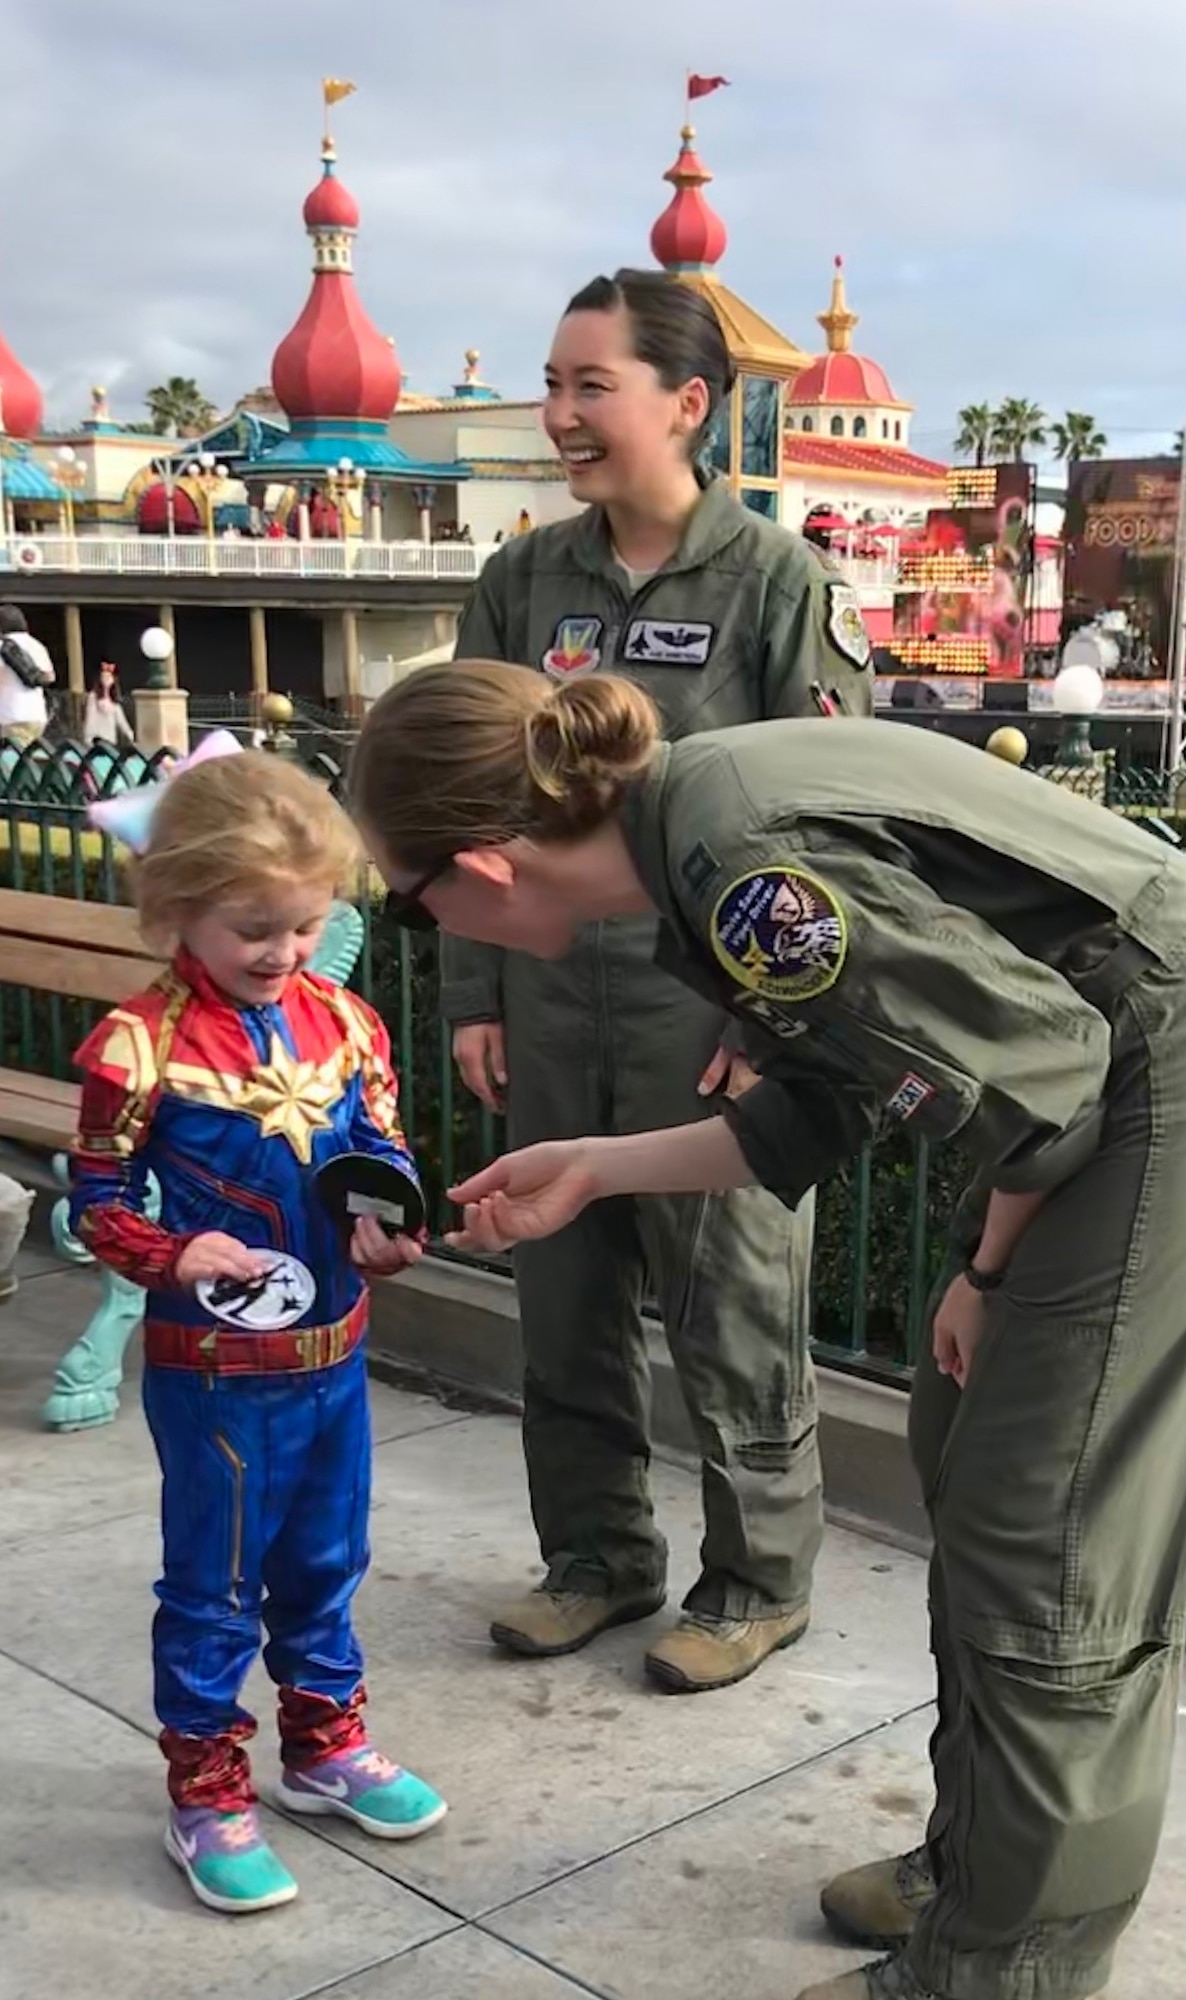 Capt. Danielle Park (right), 311th Fighter Squadron instructor pilot, hands patches to a girl dressed in a Captain Marval costume at Disney Land in Anaheim, Calif, March 3, 2019. Park was invited to attend the premiere of Captain Marval after giving the actress, Brie Larson, a ride in an F-16 Fighting Falcon while stationed at Nellis Air Force Base, Nev. (Courtesy photo)